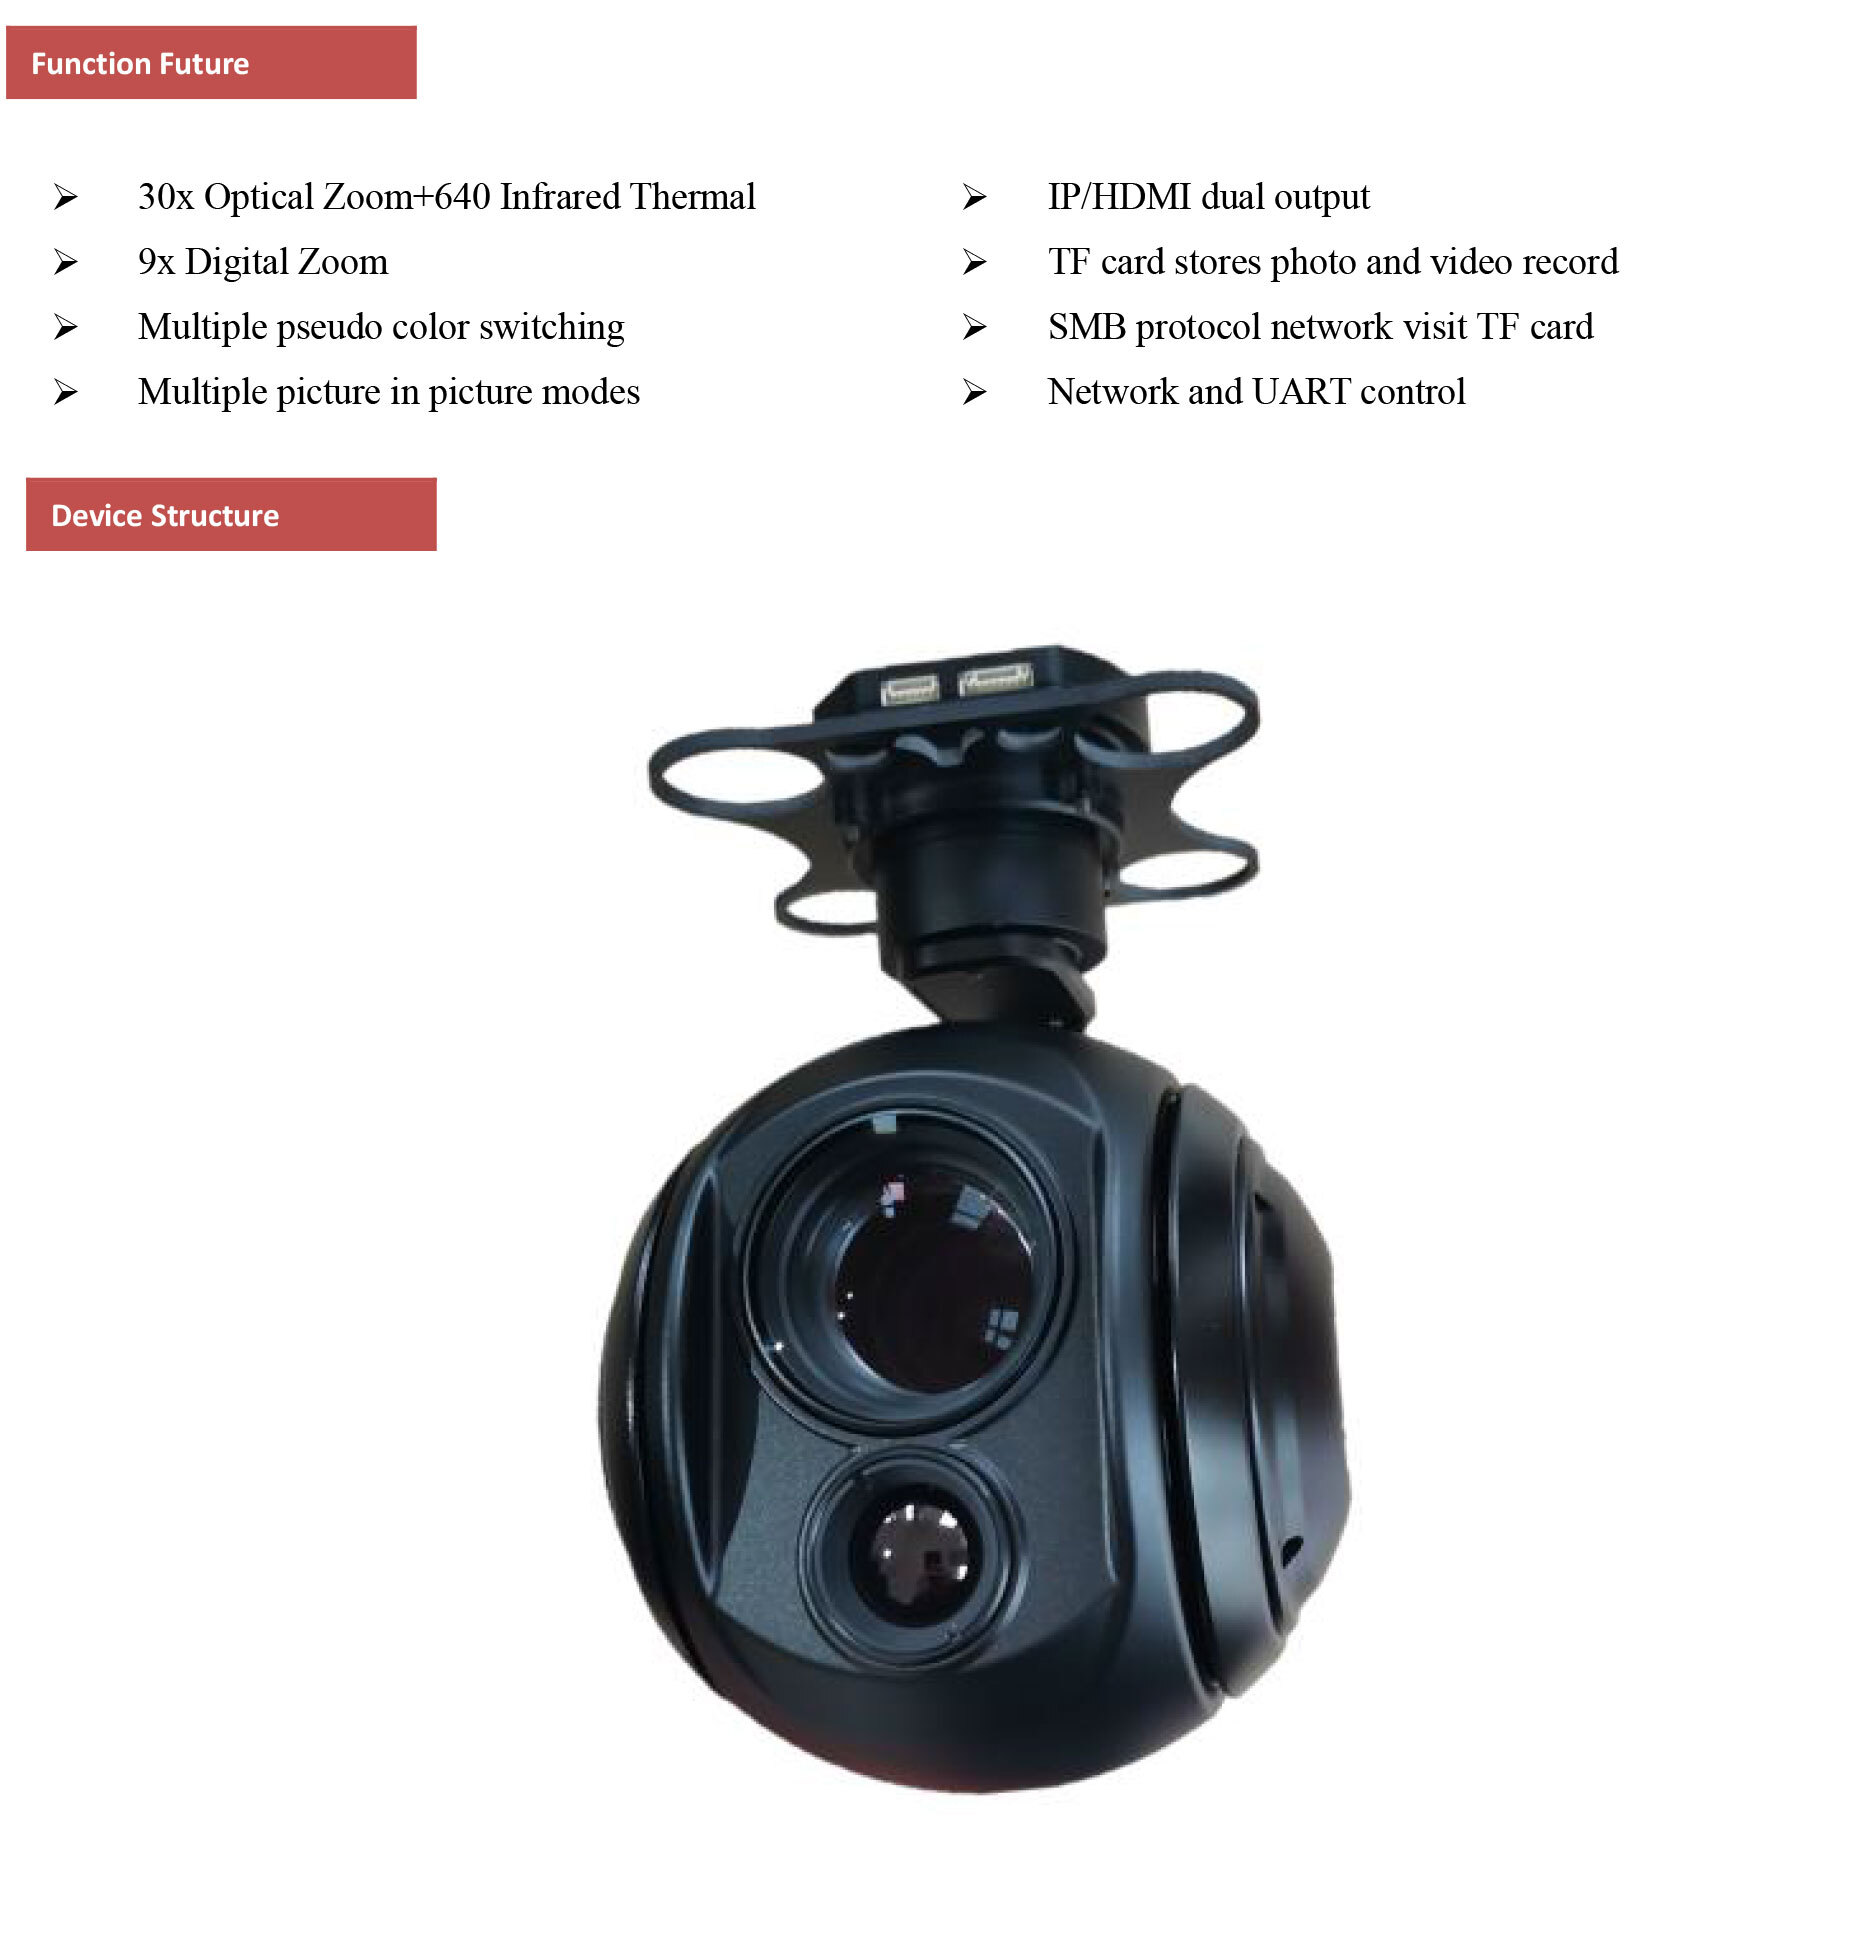 KHP30G619  30x Optical Zoom Camera + 640*512 Thermal Camera  Dual light 3-Axis Stabilized Gimbal, HDMI/IP Dual Output